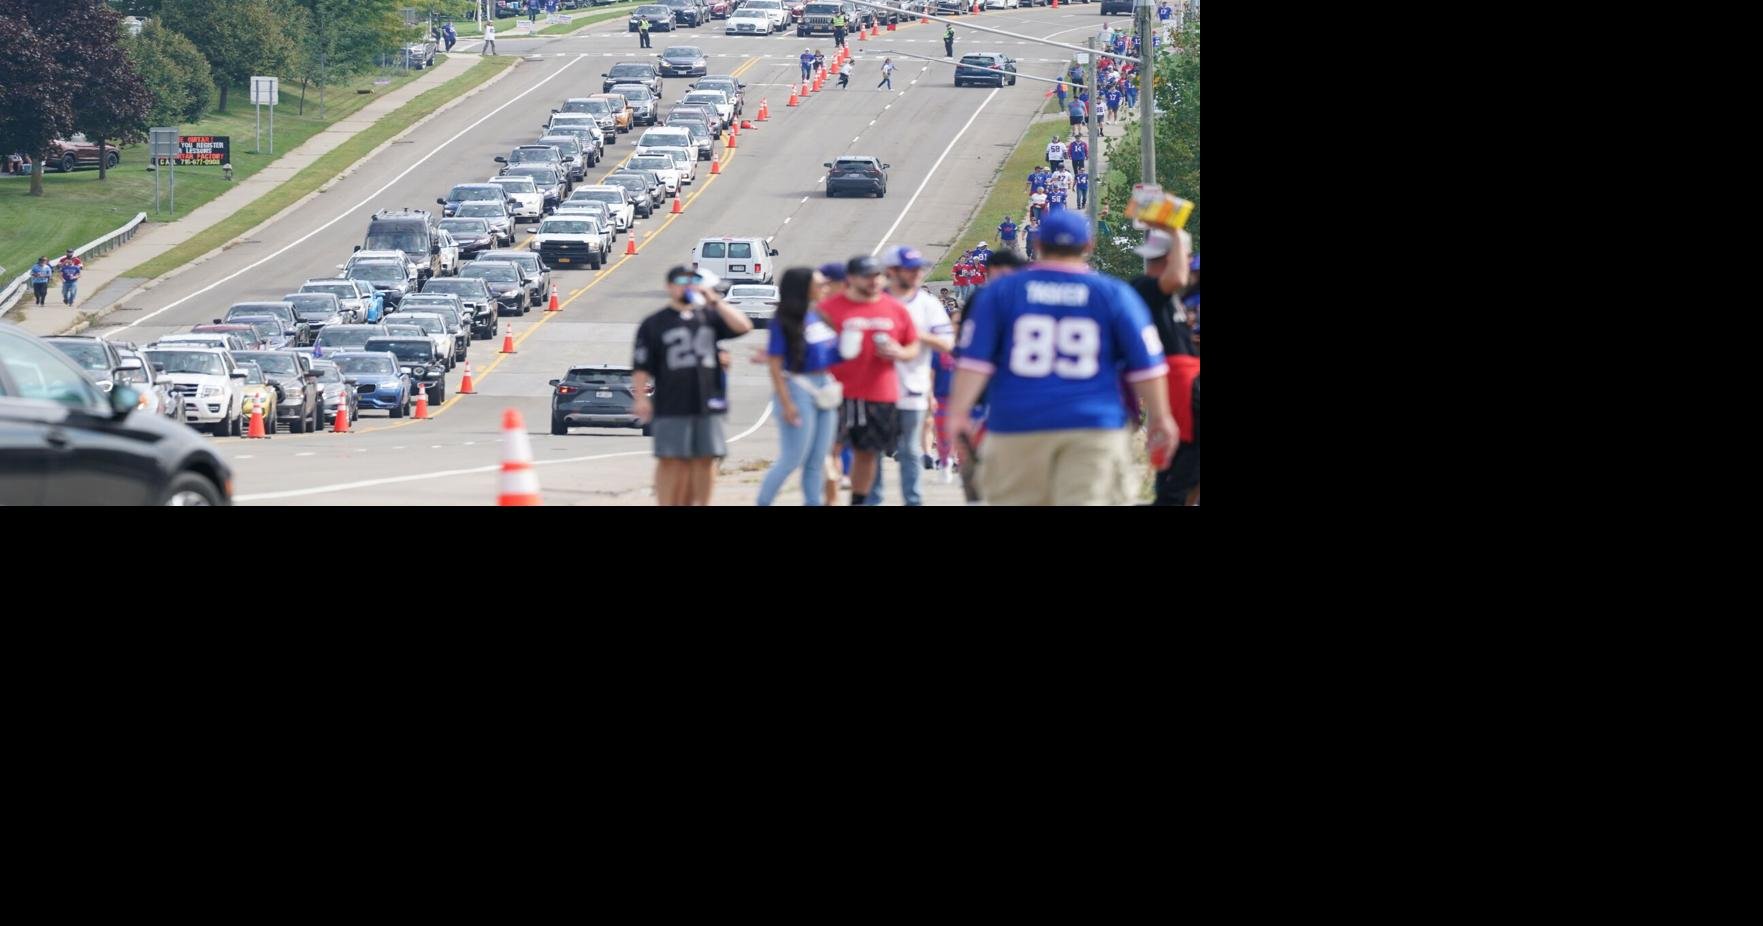 Bills game parking: Get there early, but not too early